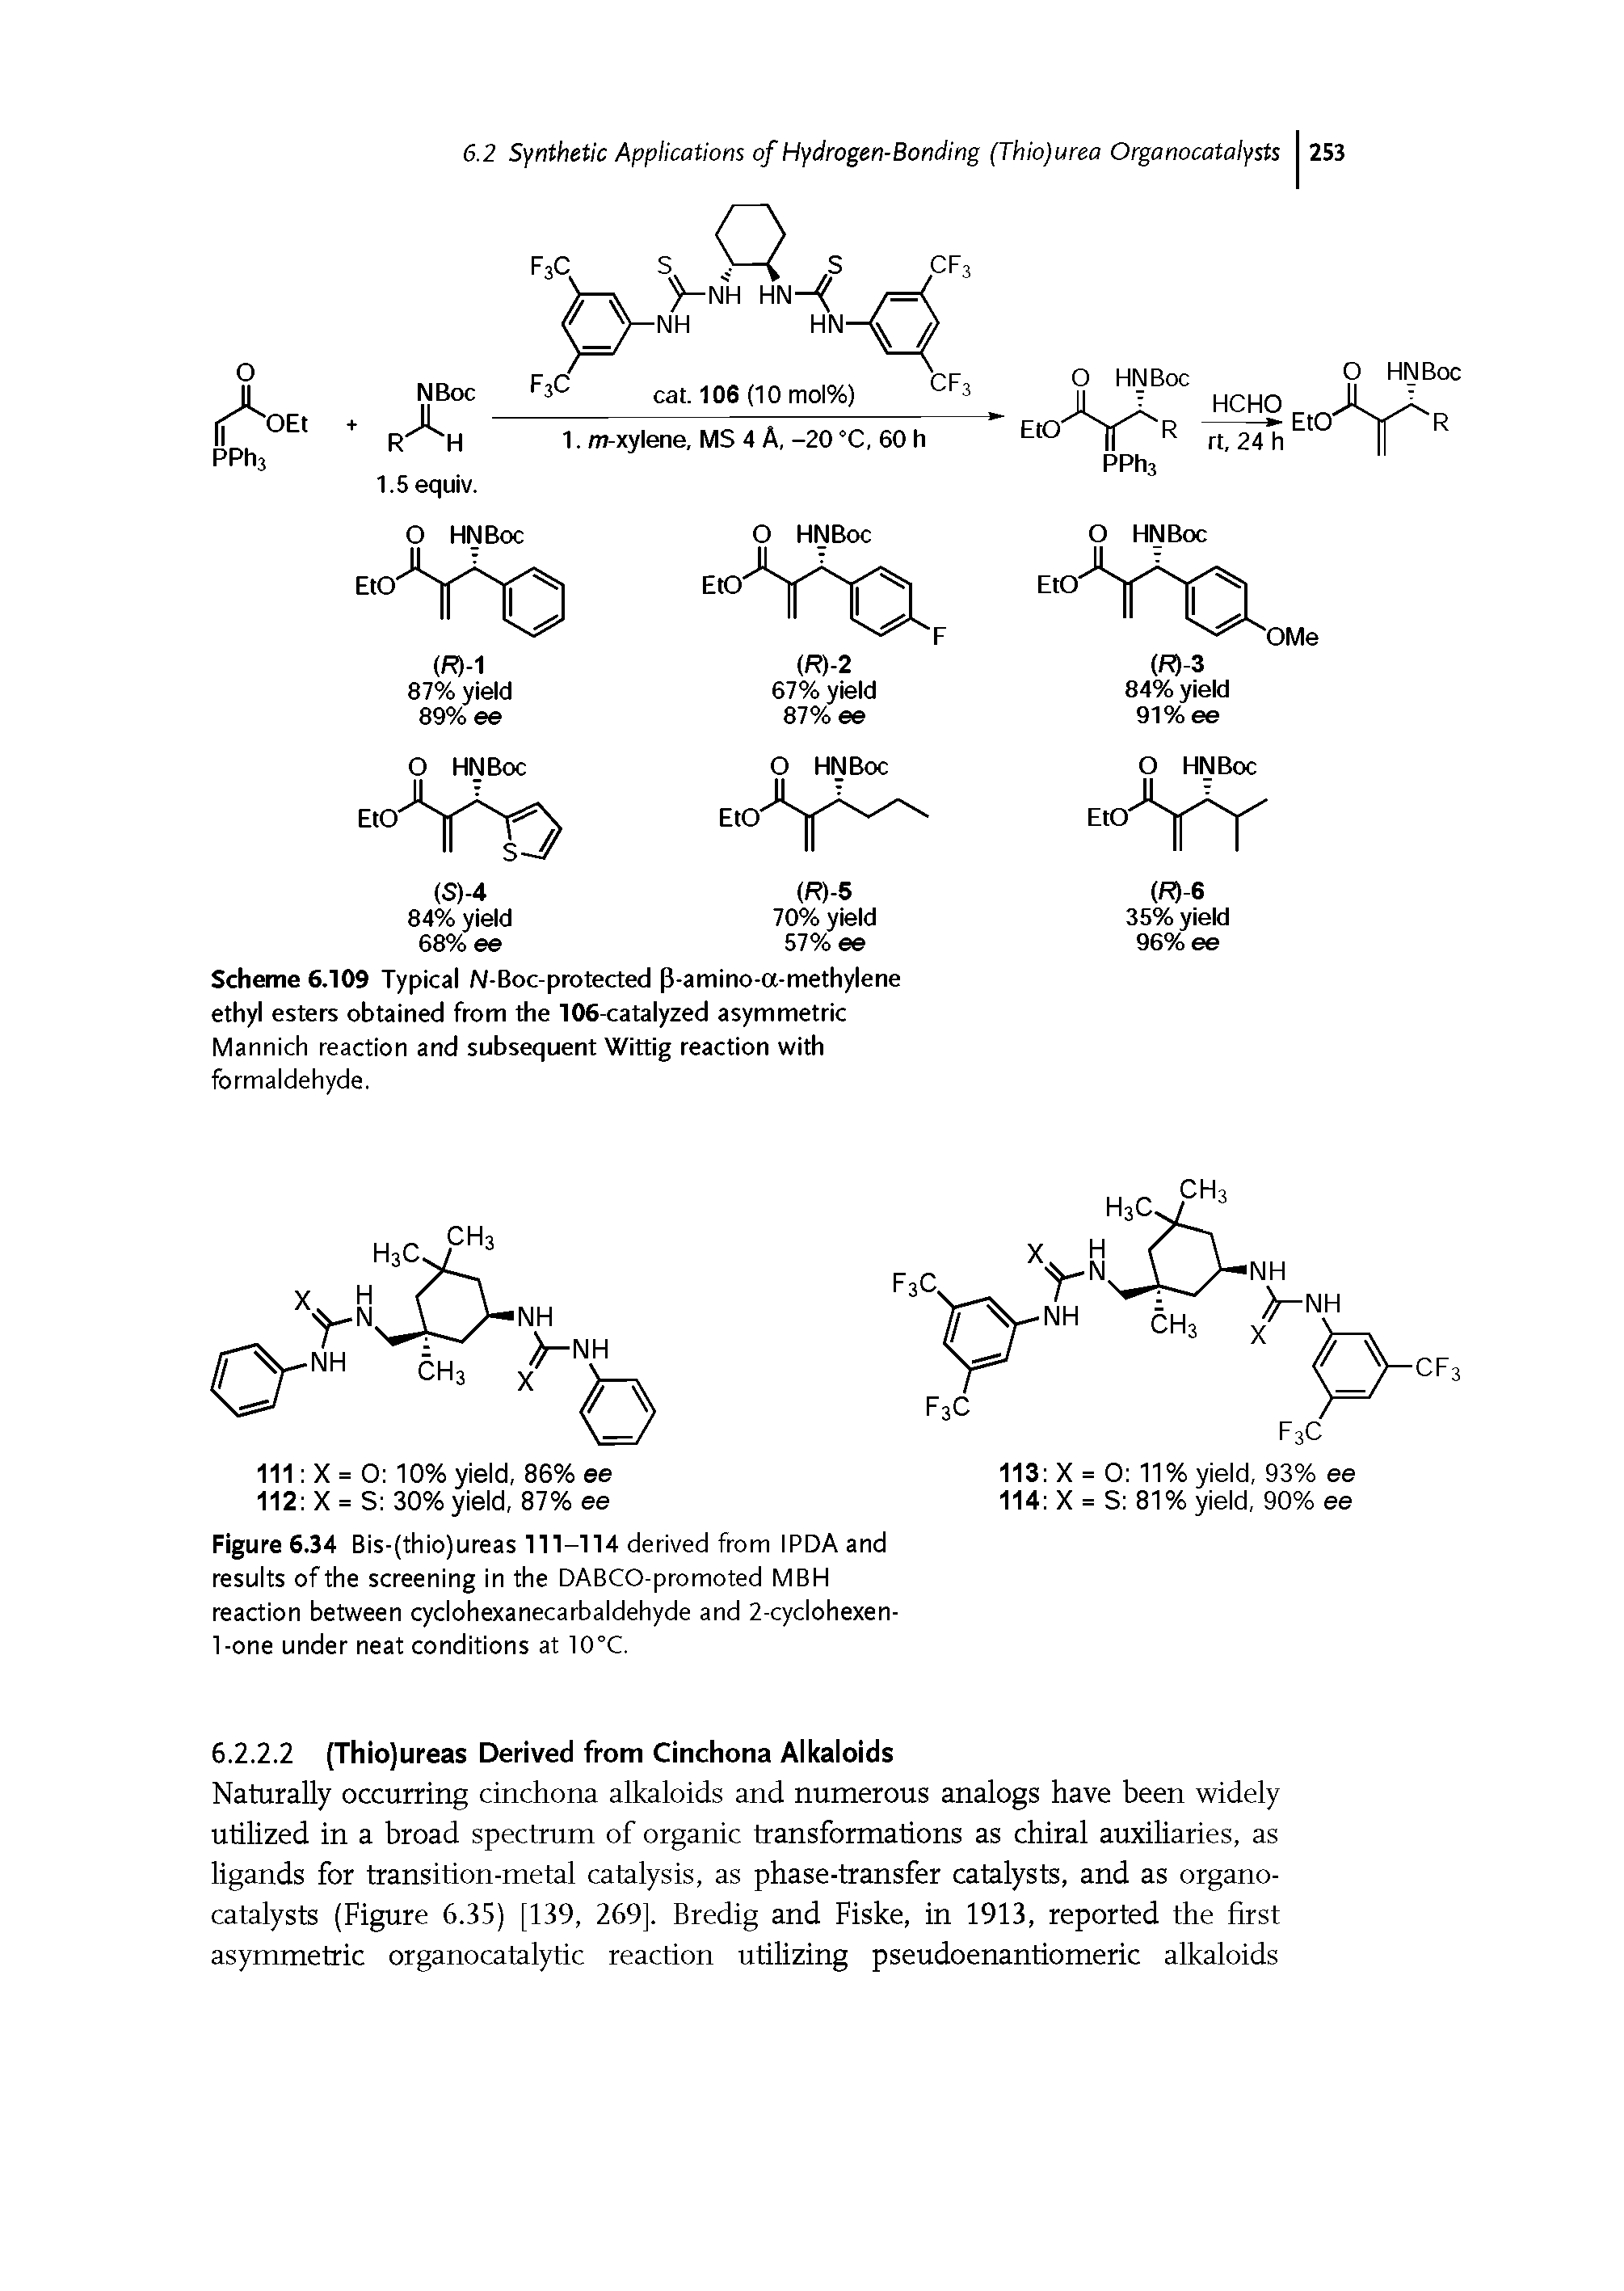 Figure 6.34 Bis-(thio)ureas 111-114 derived from IPDA and results of the screening in the DABCO-promoted MBH reaction between cyclohexanecarbaldehyde and 2-cyclohexen-1-one under neat conditions at 10°C.